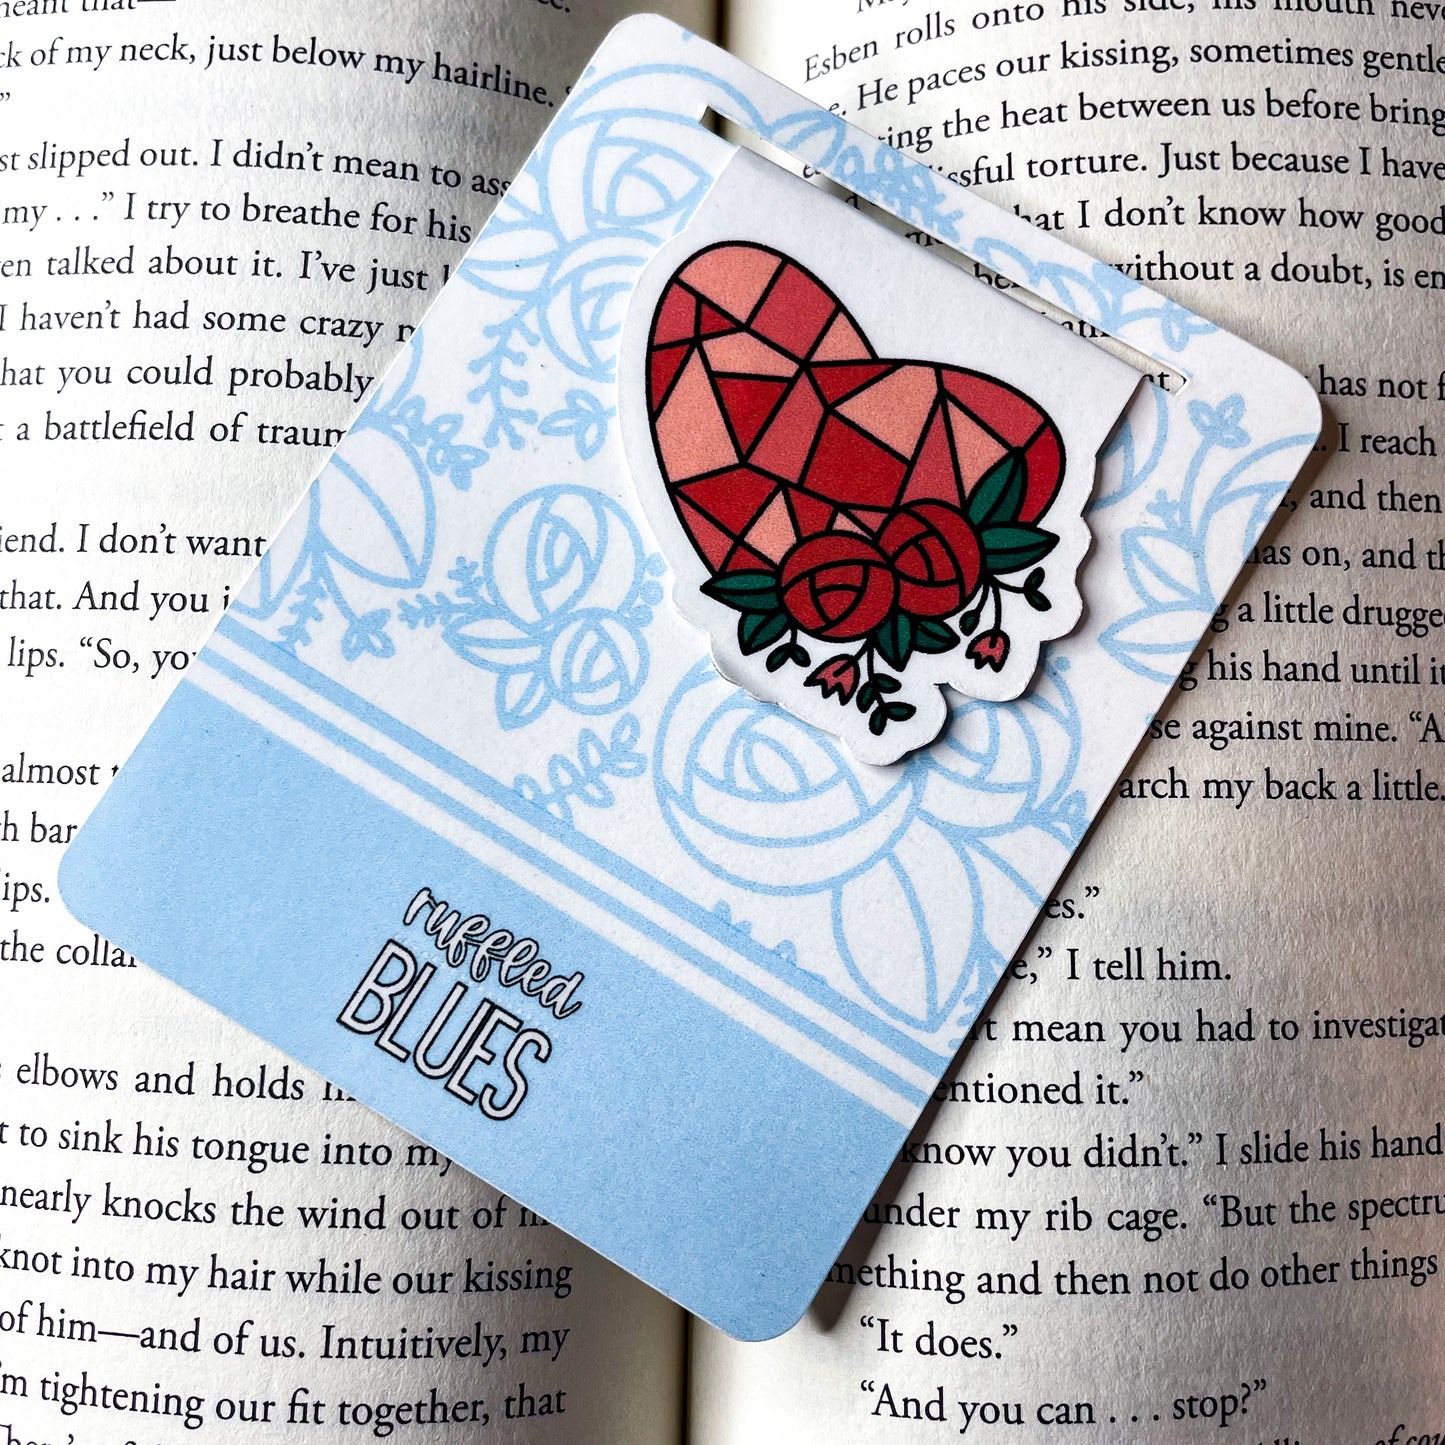 Geometric Floral Heart Magnetic Bookmark